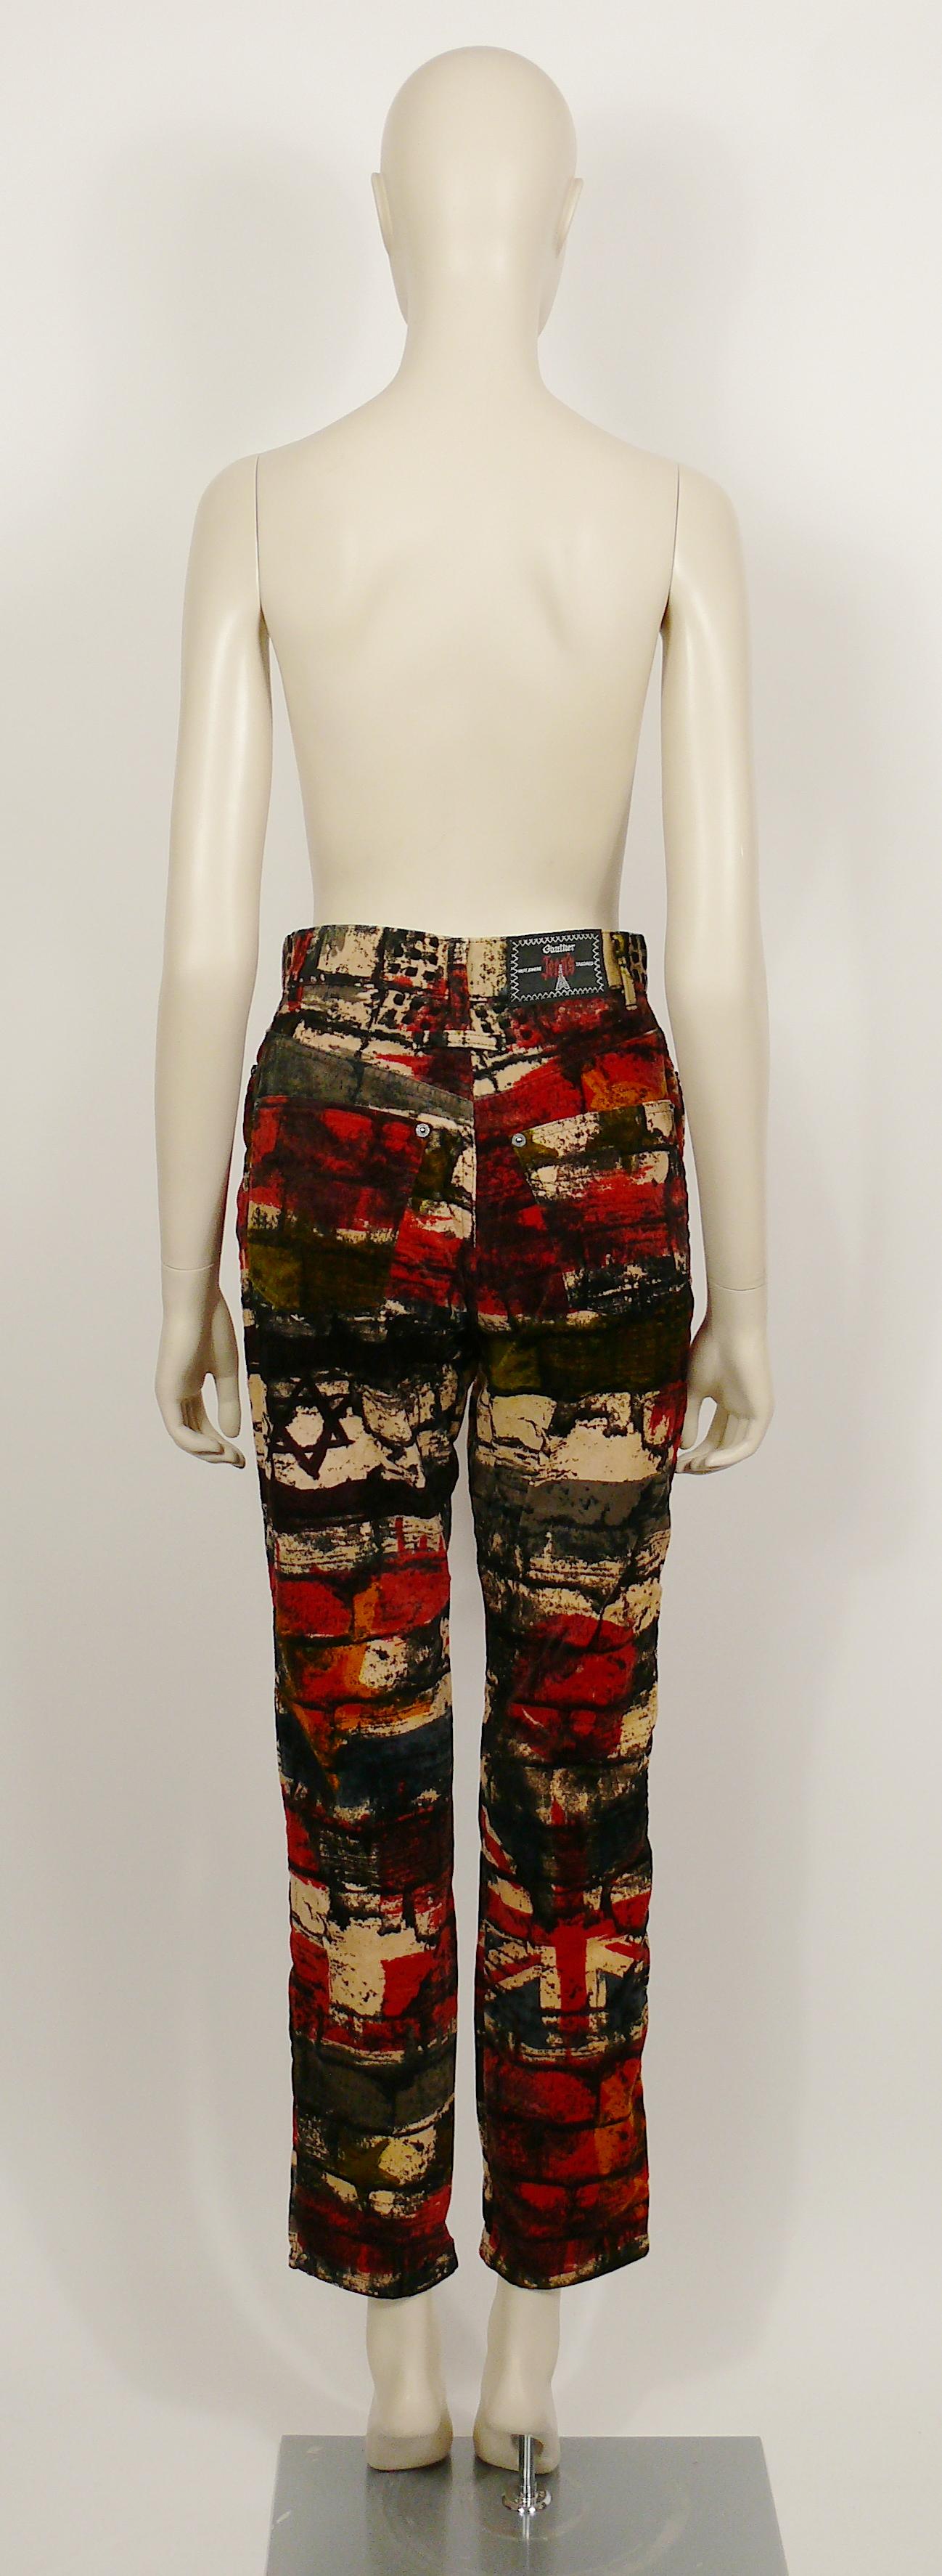 Jean Paul Gaultier Vintage Wall and Flags Print Pants Trousers For Sale 3